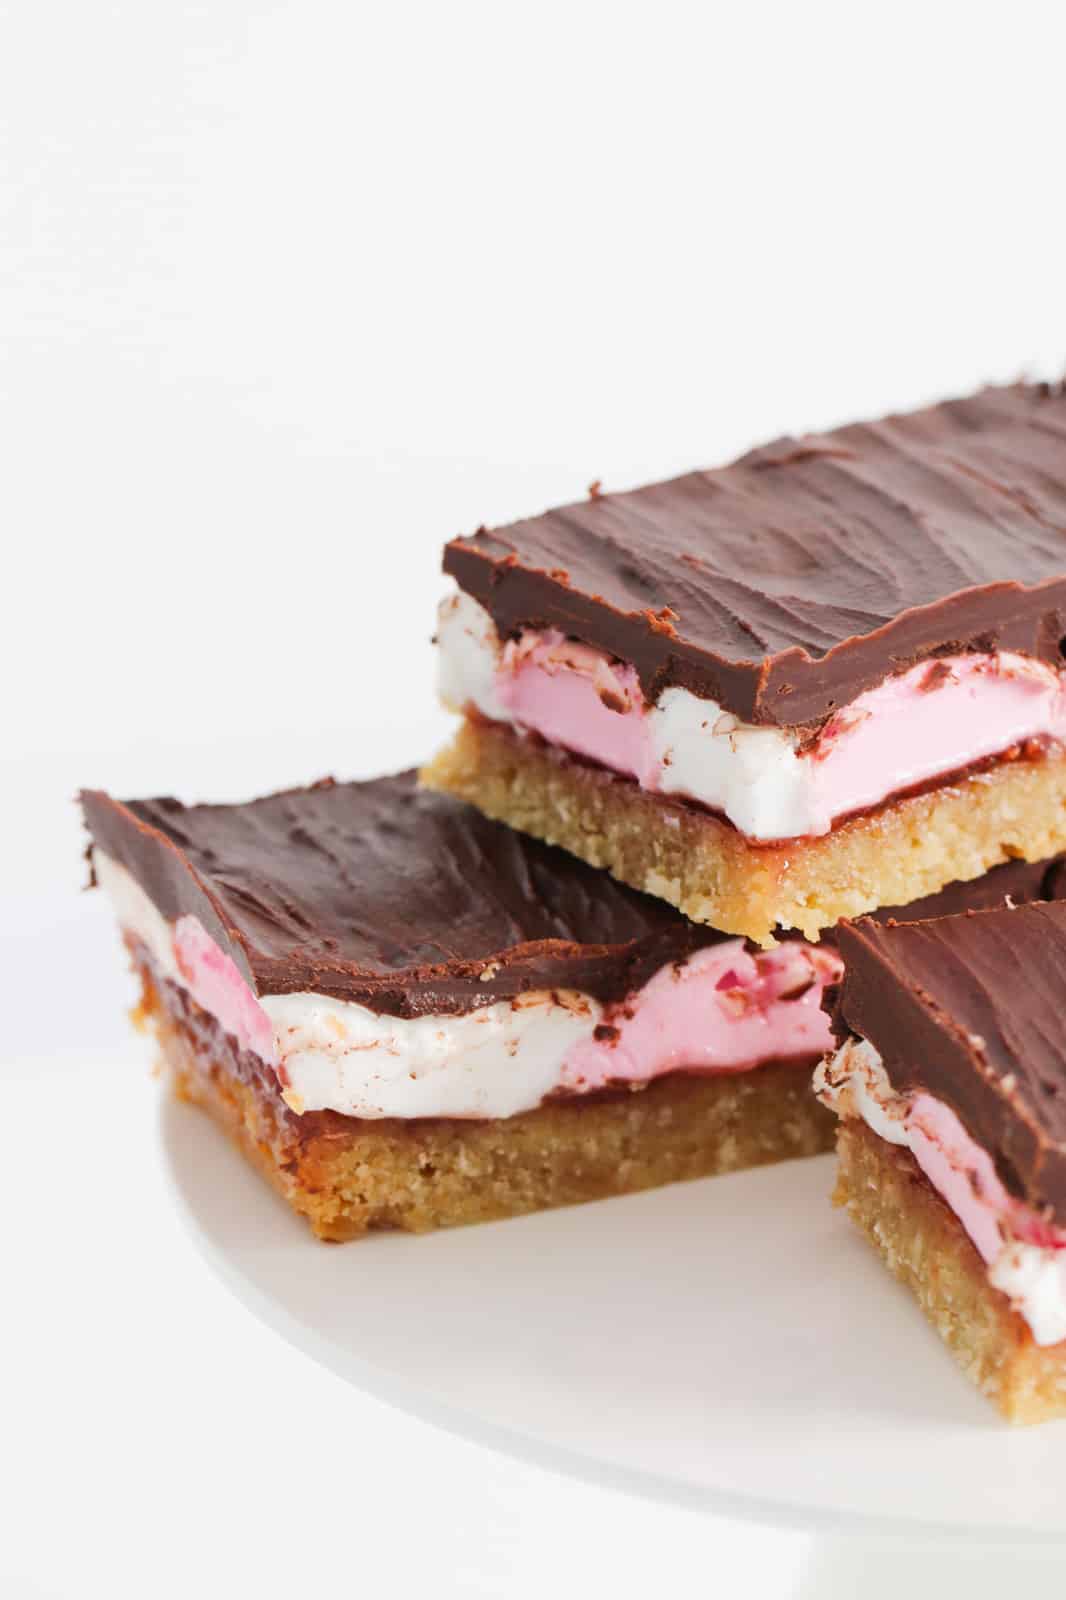 A close up of a stack of marshmallow chocolate slices.